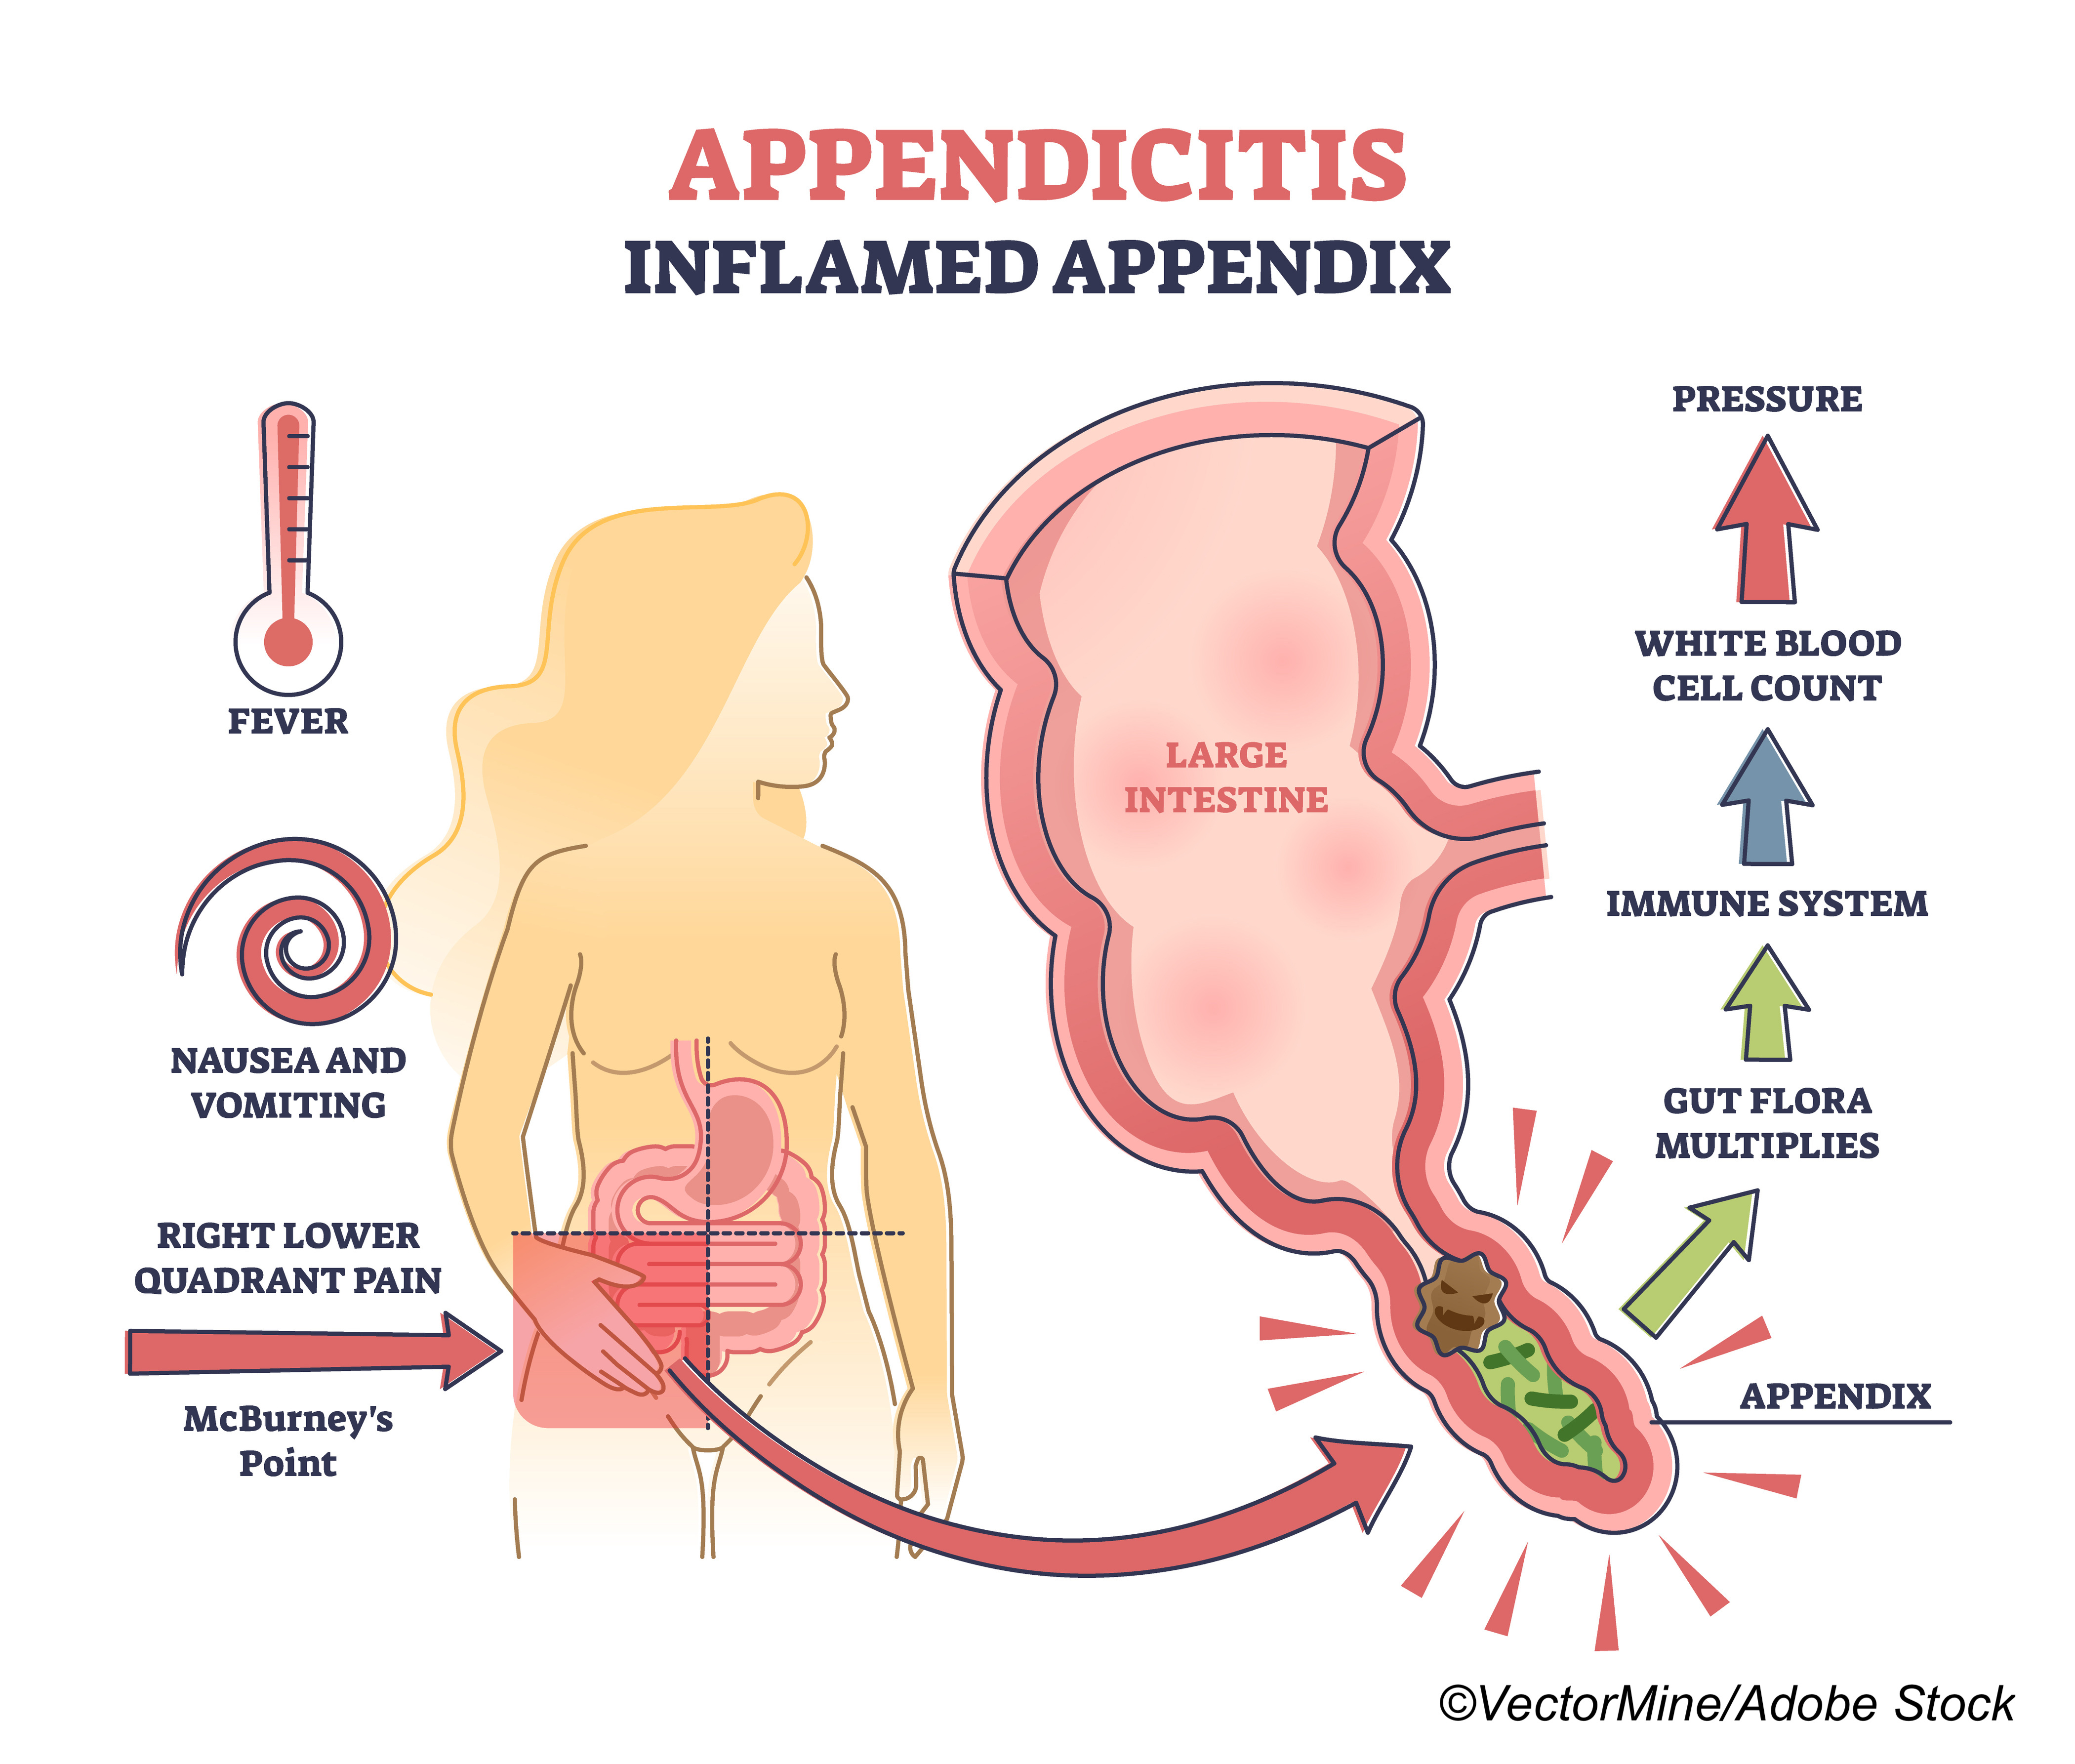 New Findings Raise Question About Durability of Antibiotic Tx for Appendicitis